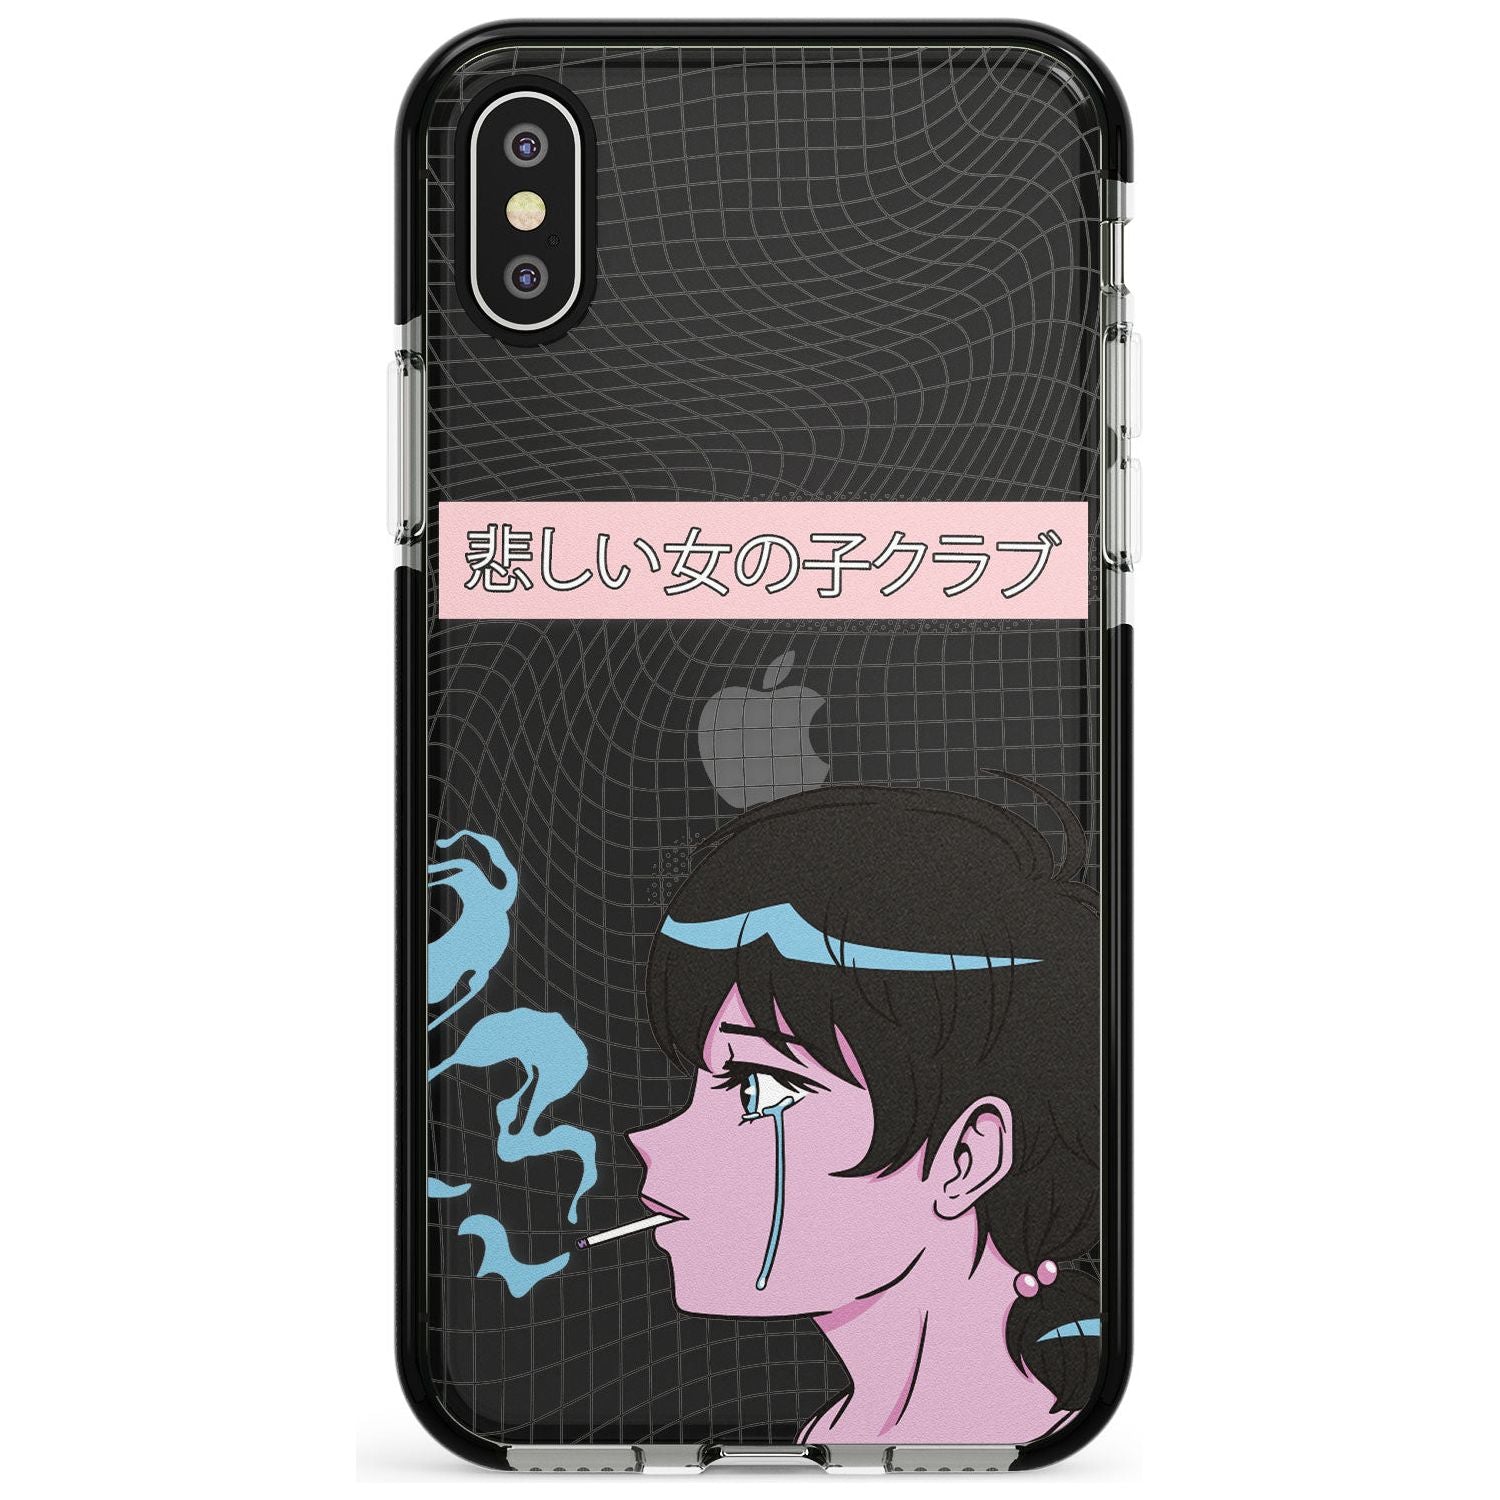 Lost Love Black Impact Phone Case for iPhone X XS Max XR